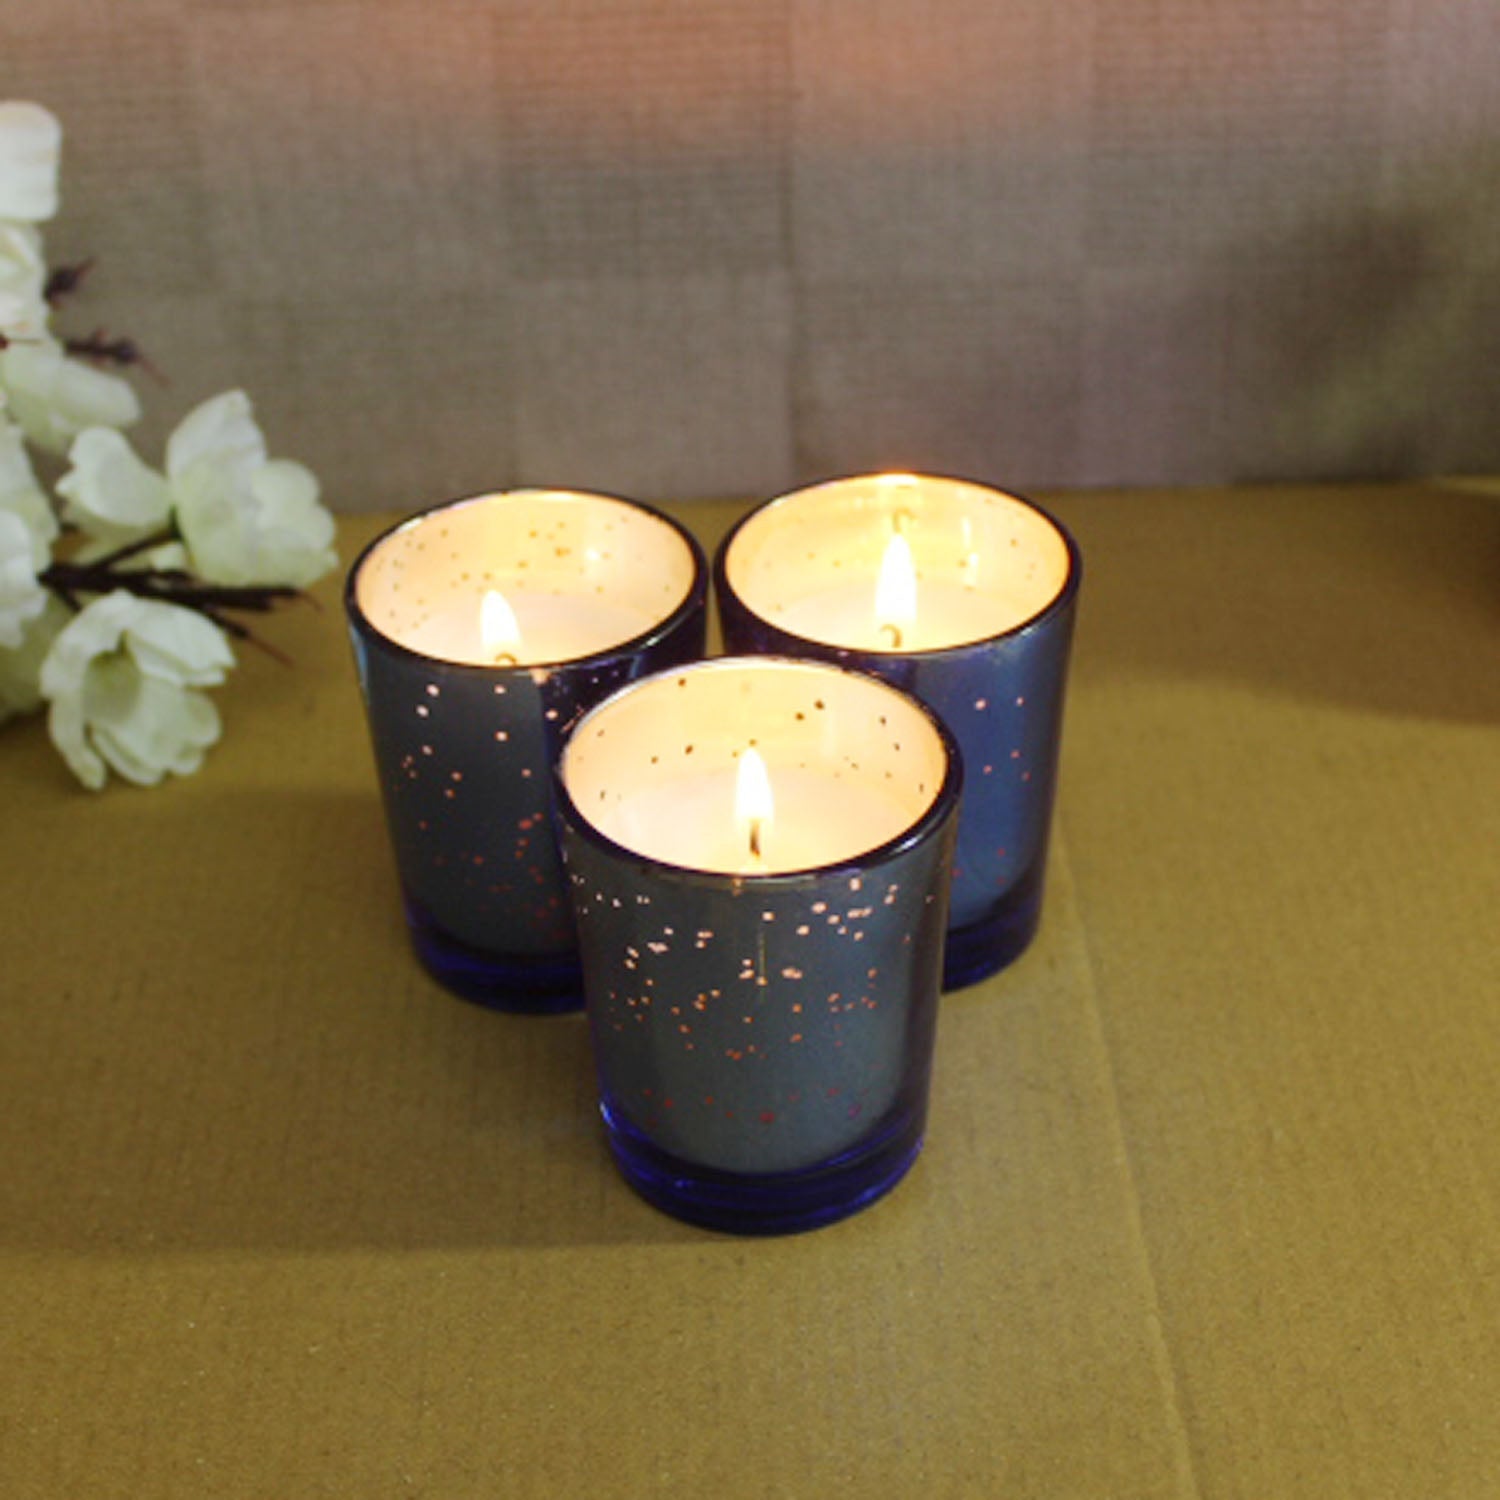 Hosley Set 3 Lavender Fragrance Metallic Blue Glass Candle / Candles for Home Decoration